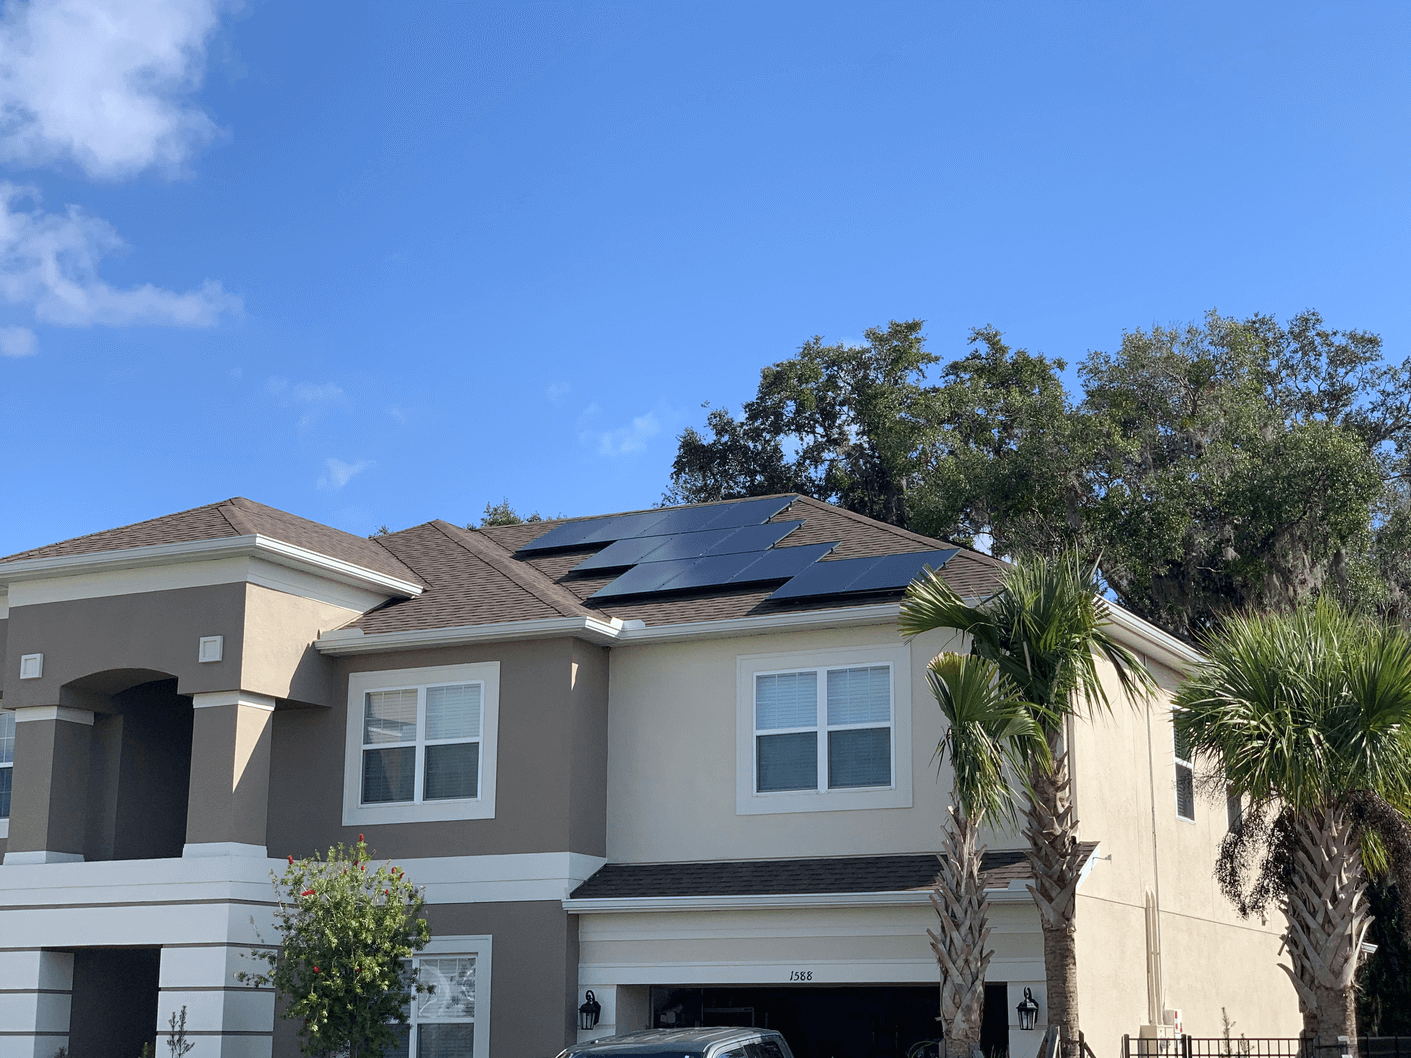 off-grid and grid-tied solar system services